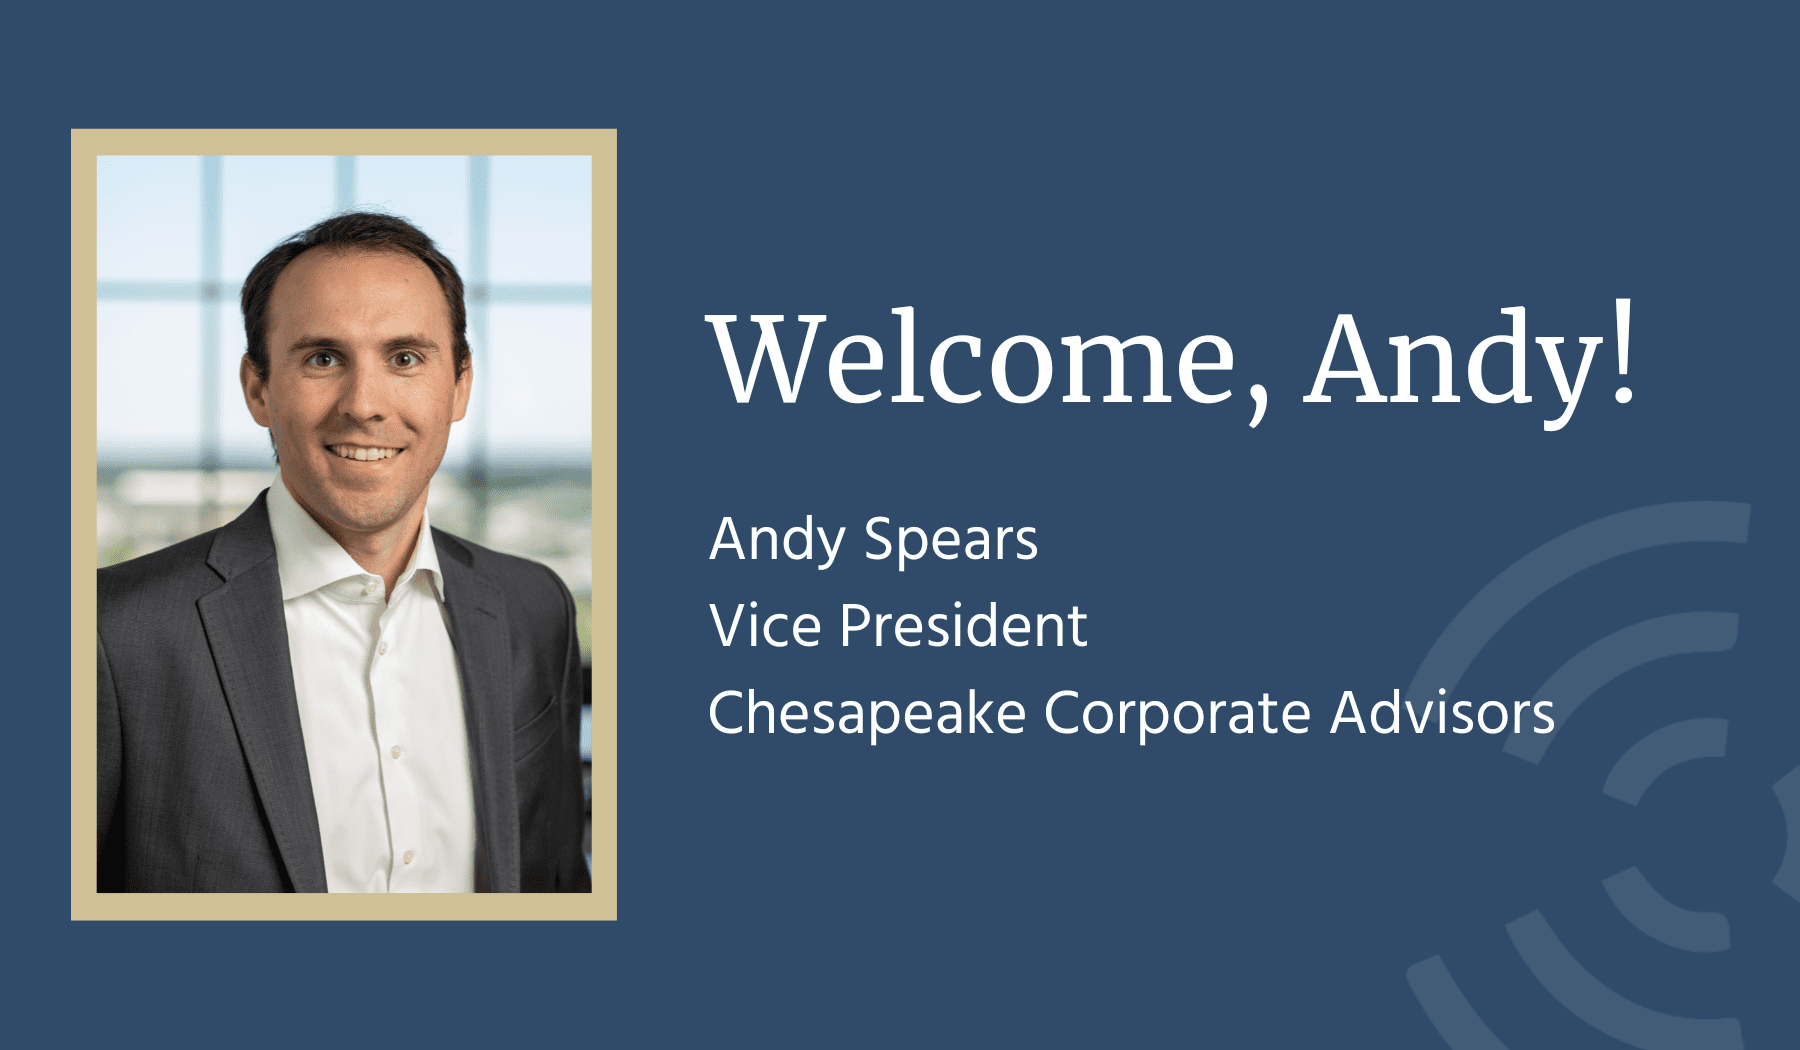 Chesapeake Corporate Advisors Welcomes Andy Spears as Vice President